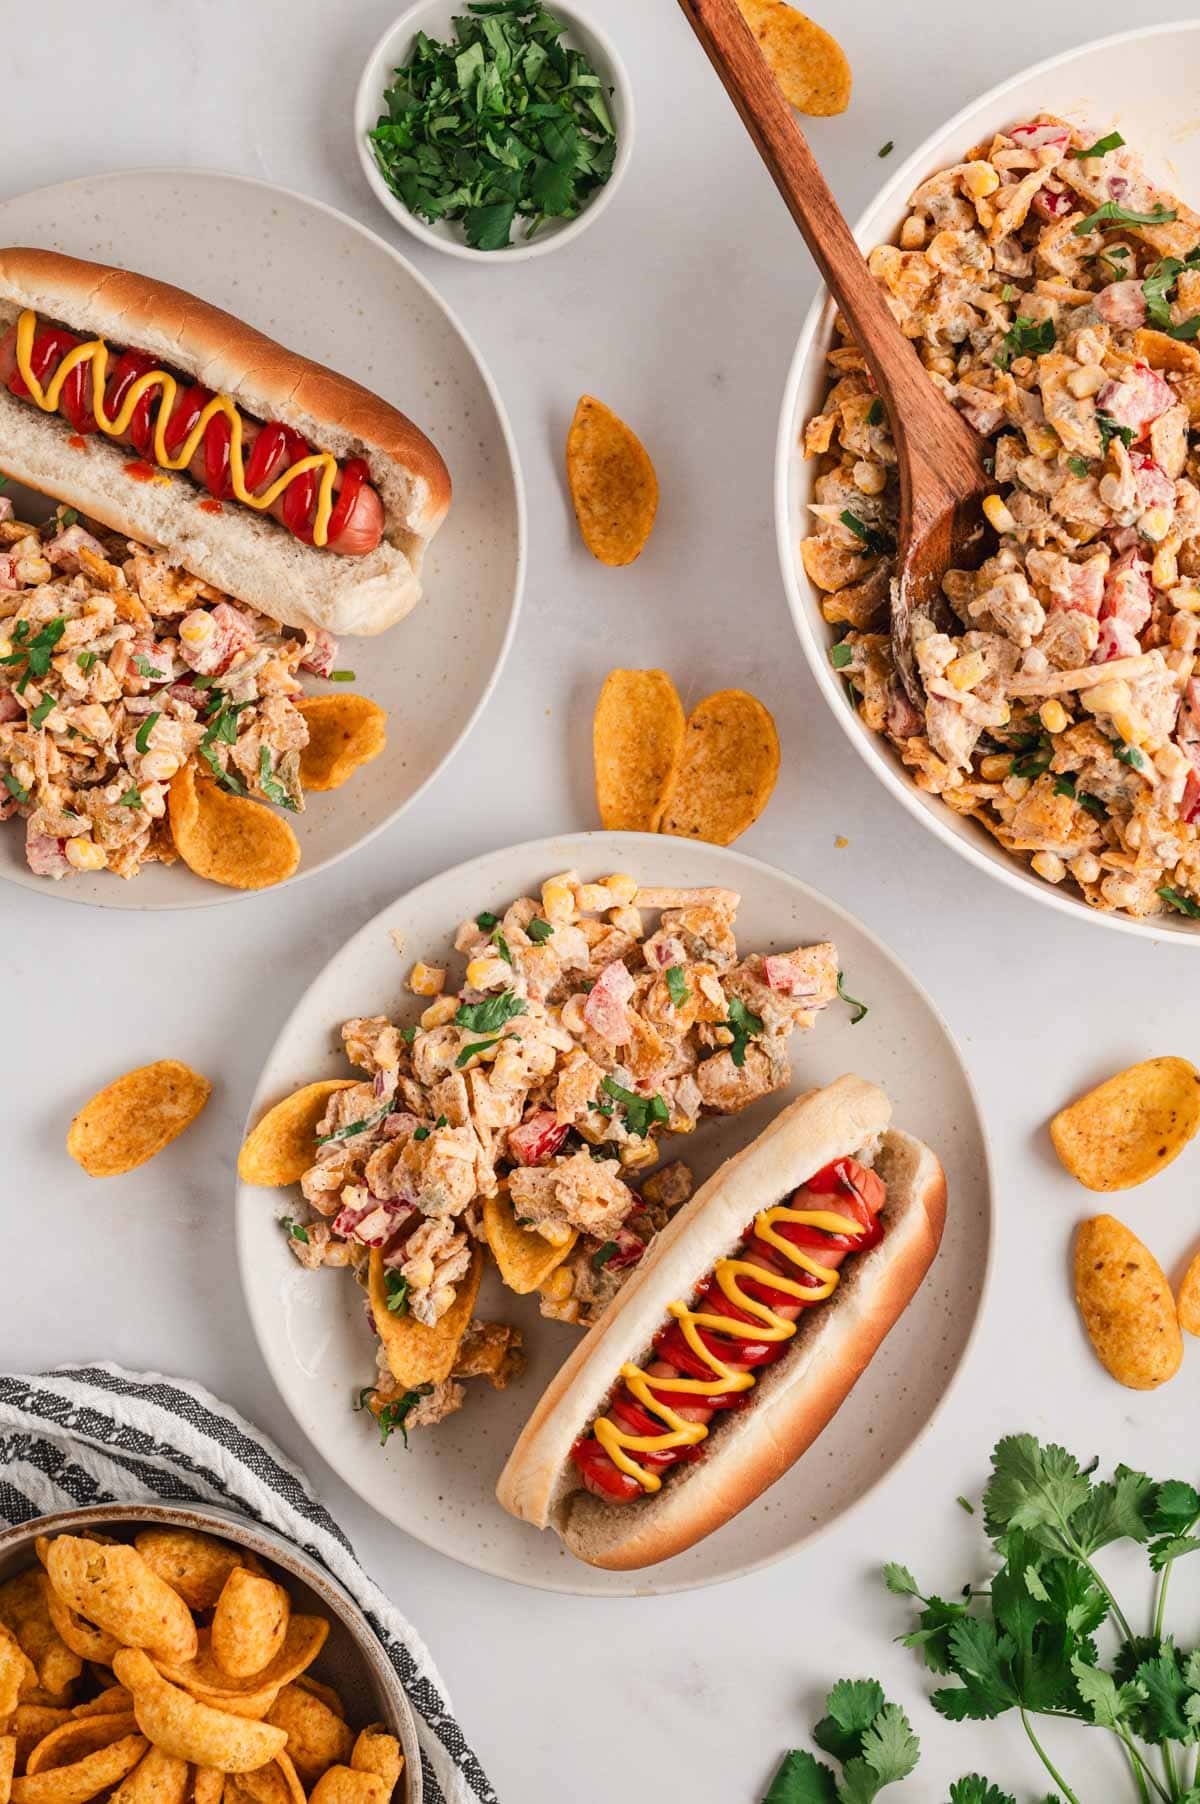 Hot dogs and frito corn salad plated.